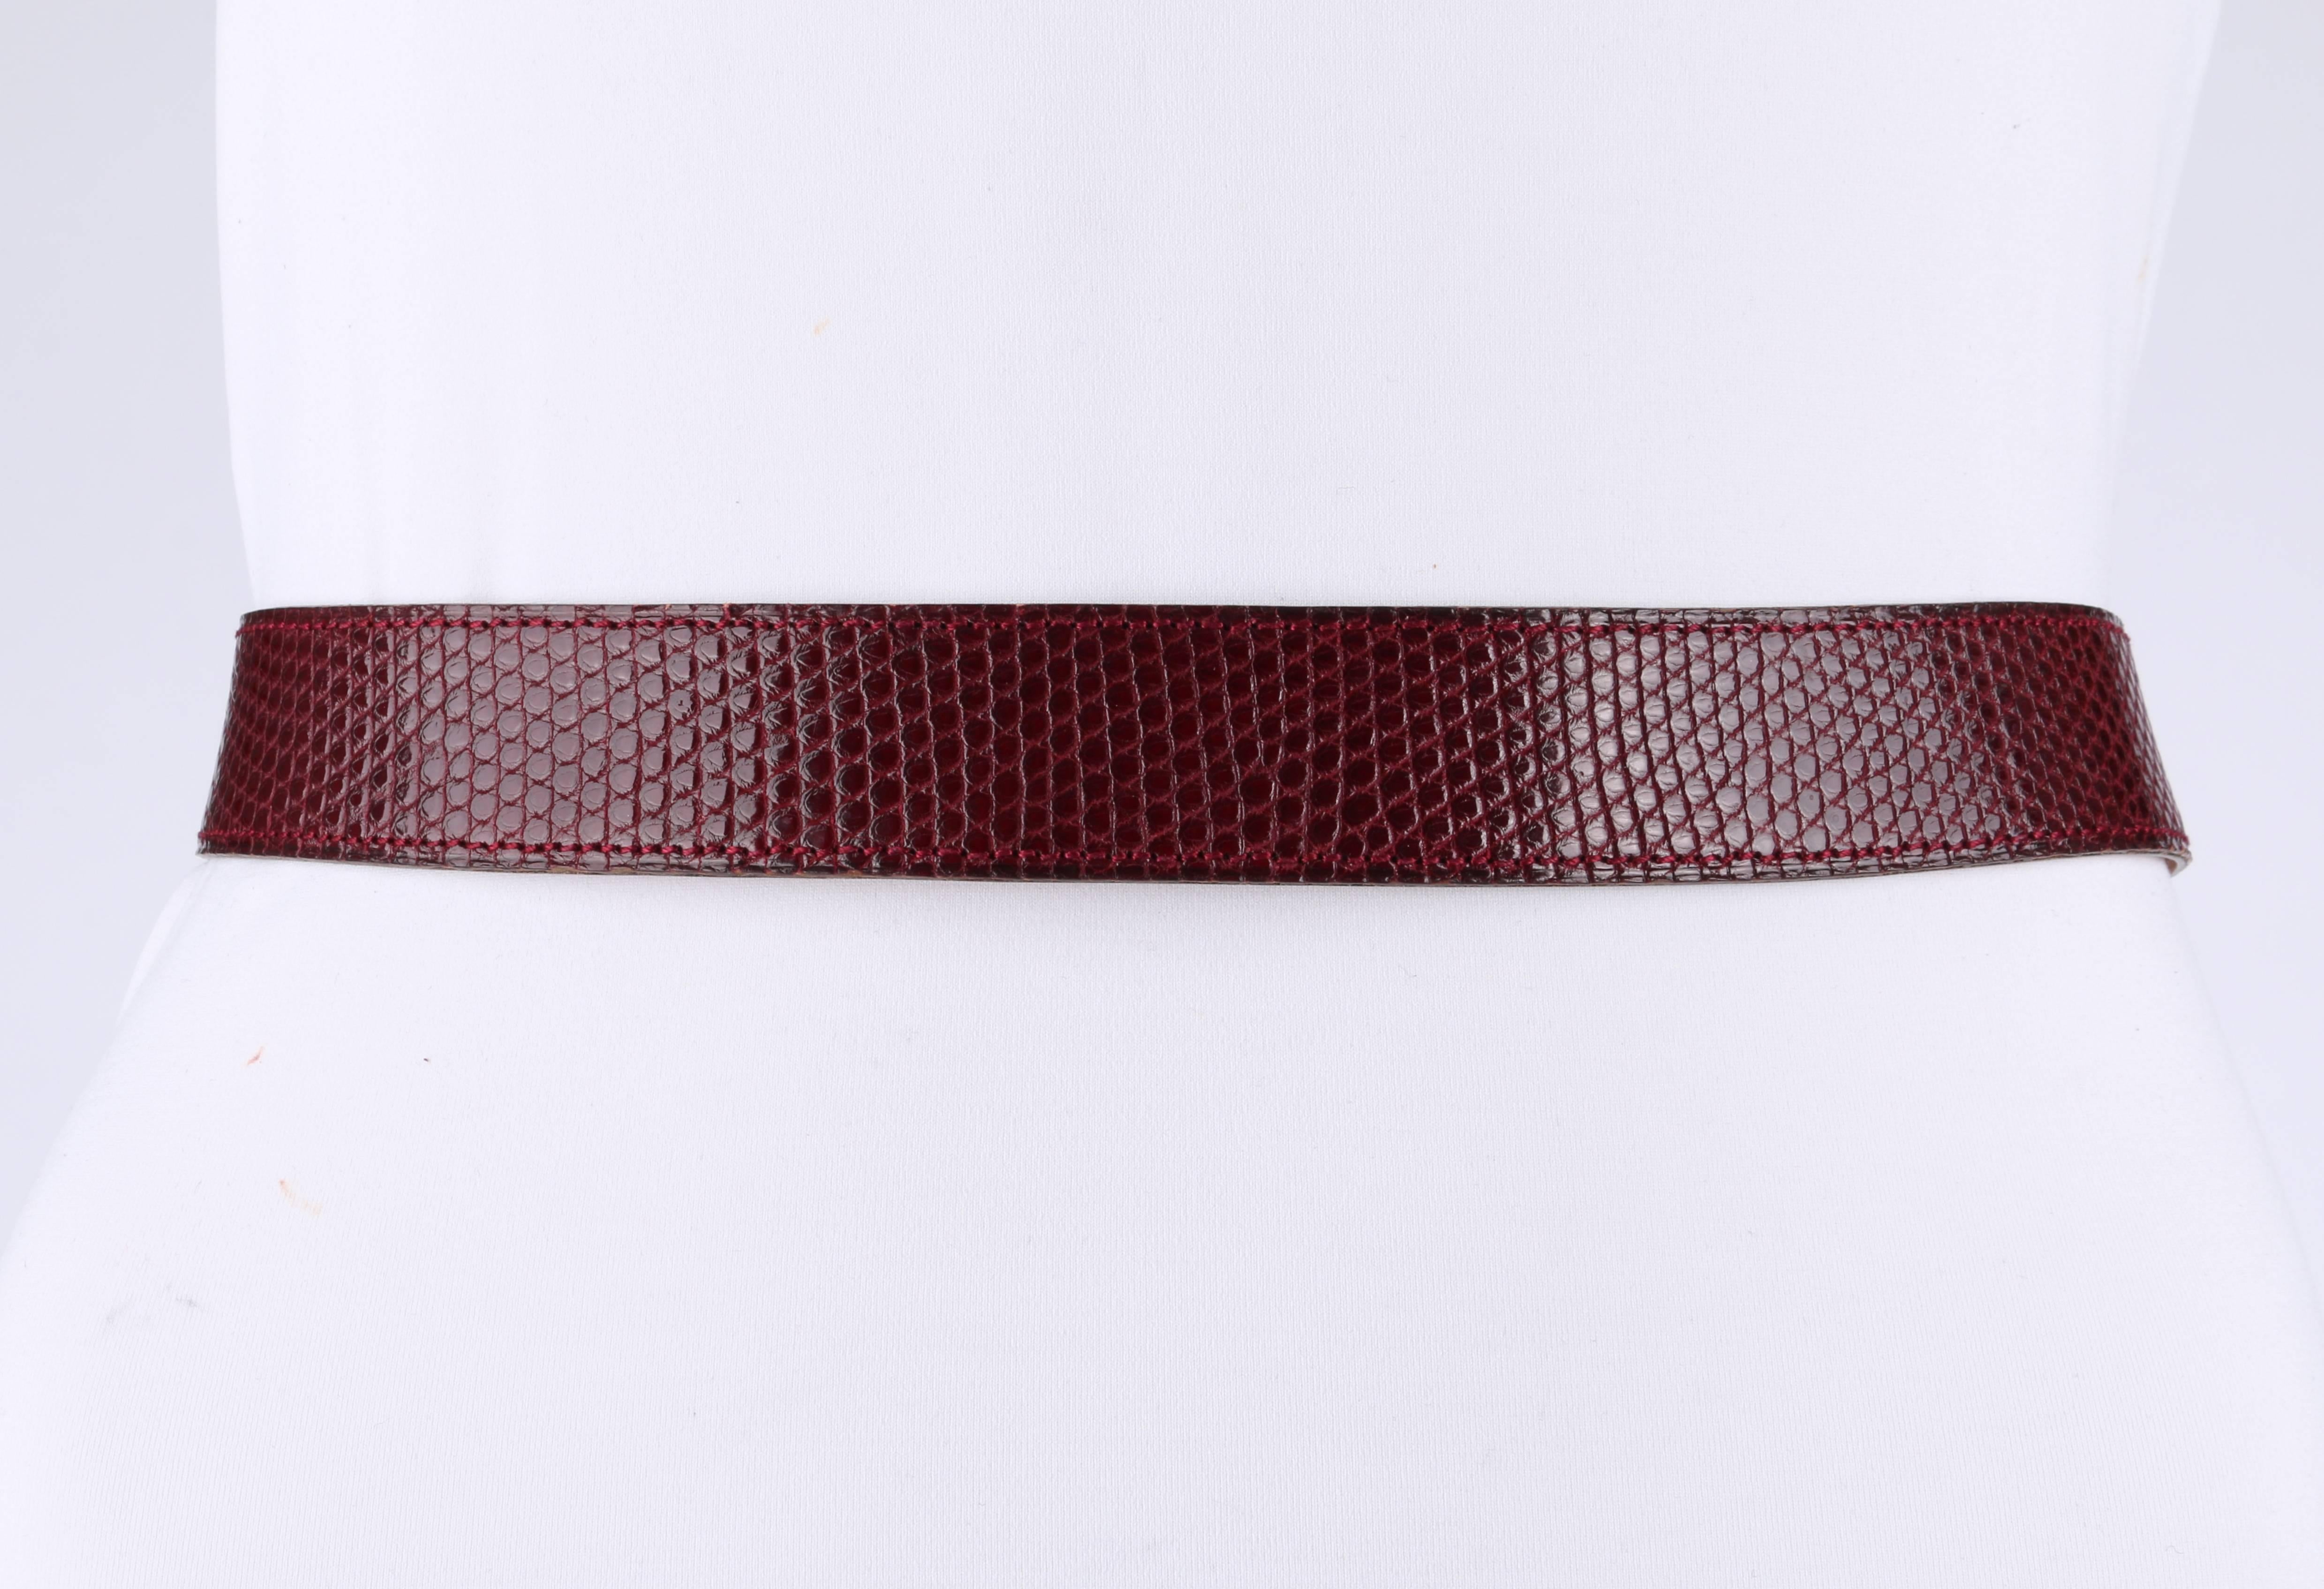 Hermes c.1980's Burgundy Lizard Skin Leather Equestrian Ring Belt Gold Hardware

Brand / Manufacturer: Hermes
Designer: Eric Bergere 
Circa: 1980's
Style: Belt
Color(s): Shades of burgundy and gold
Lined: No
Unmarked Fabric Content: Genuine leather